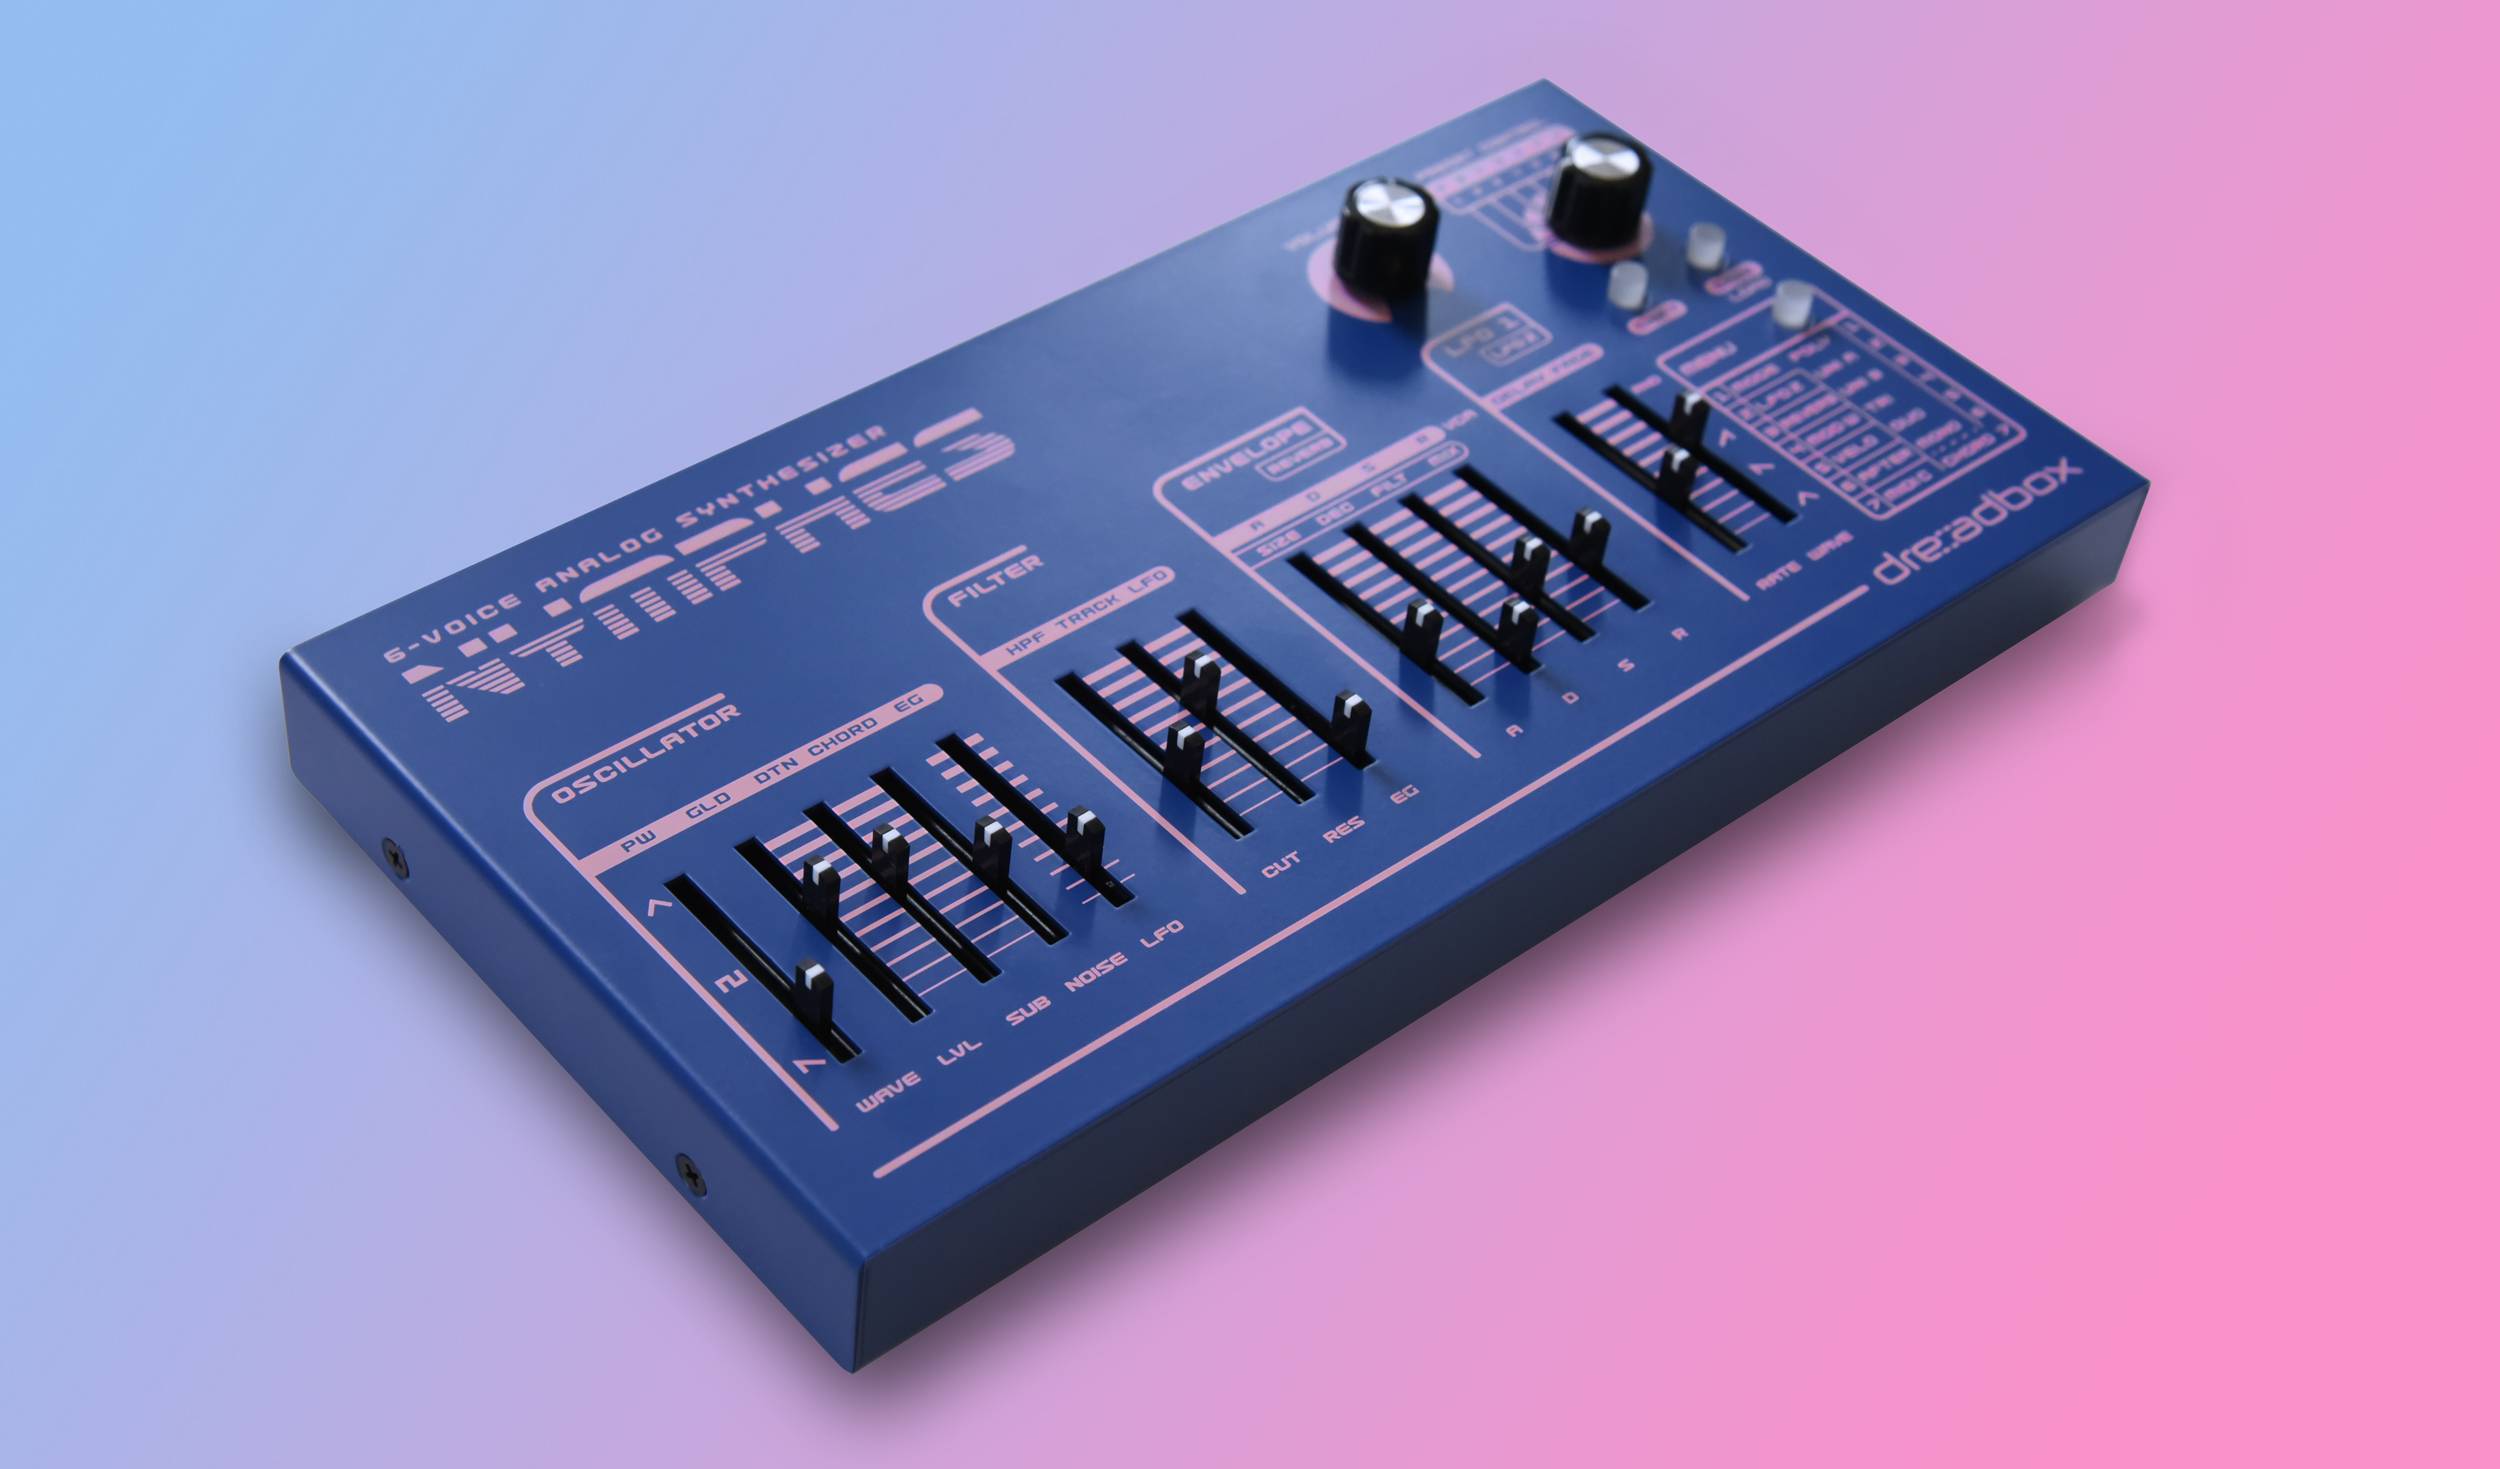 Nymphes is the new six-voice analog synth from Dreadbox